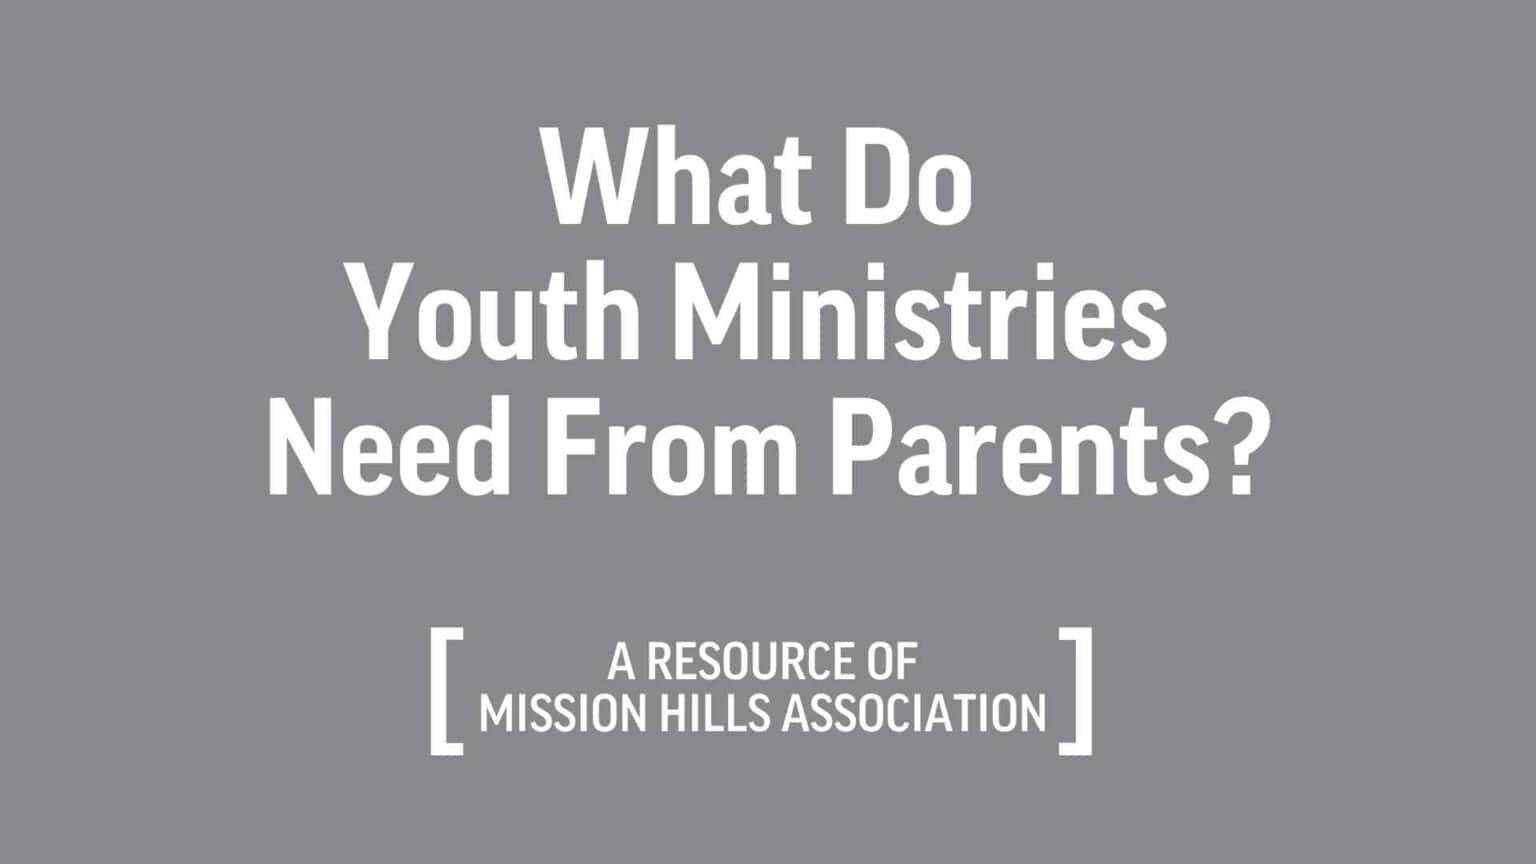 What Do Youth Ministries Need From Parents?